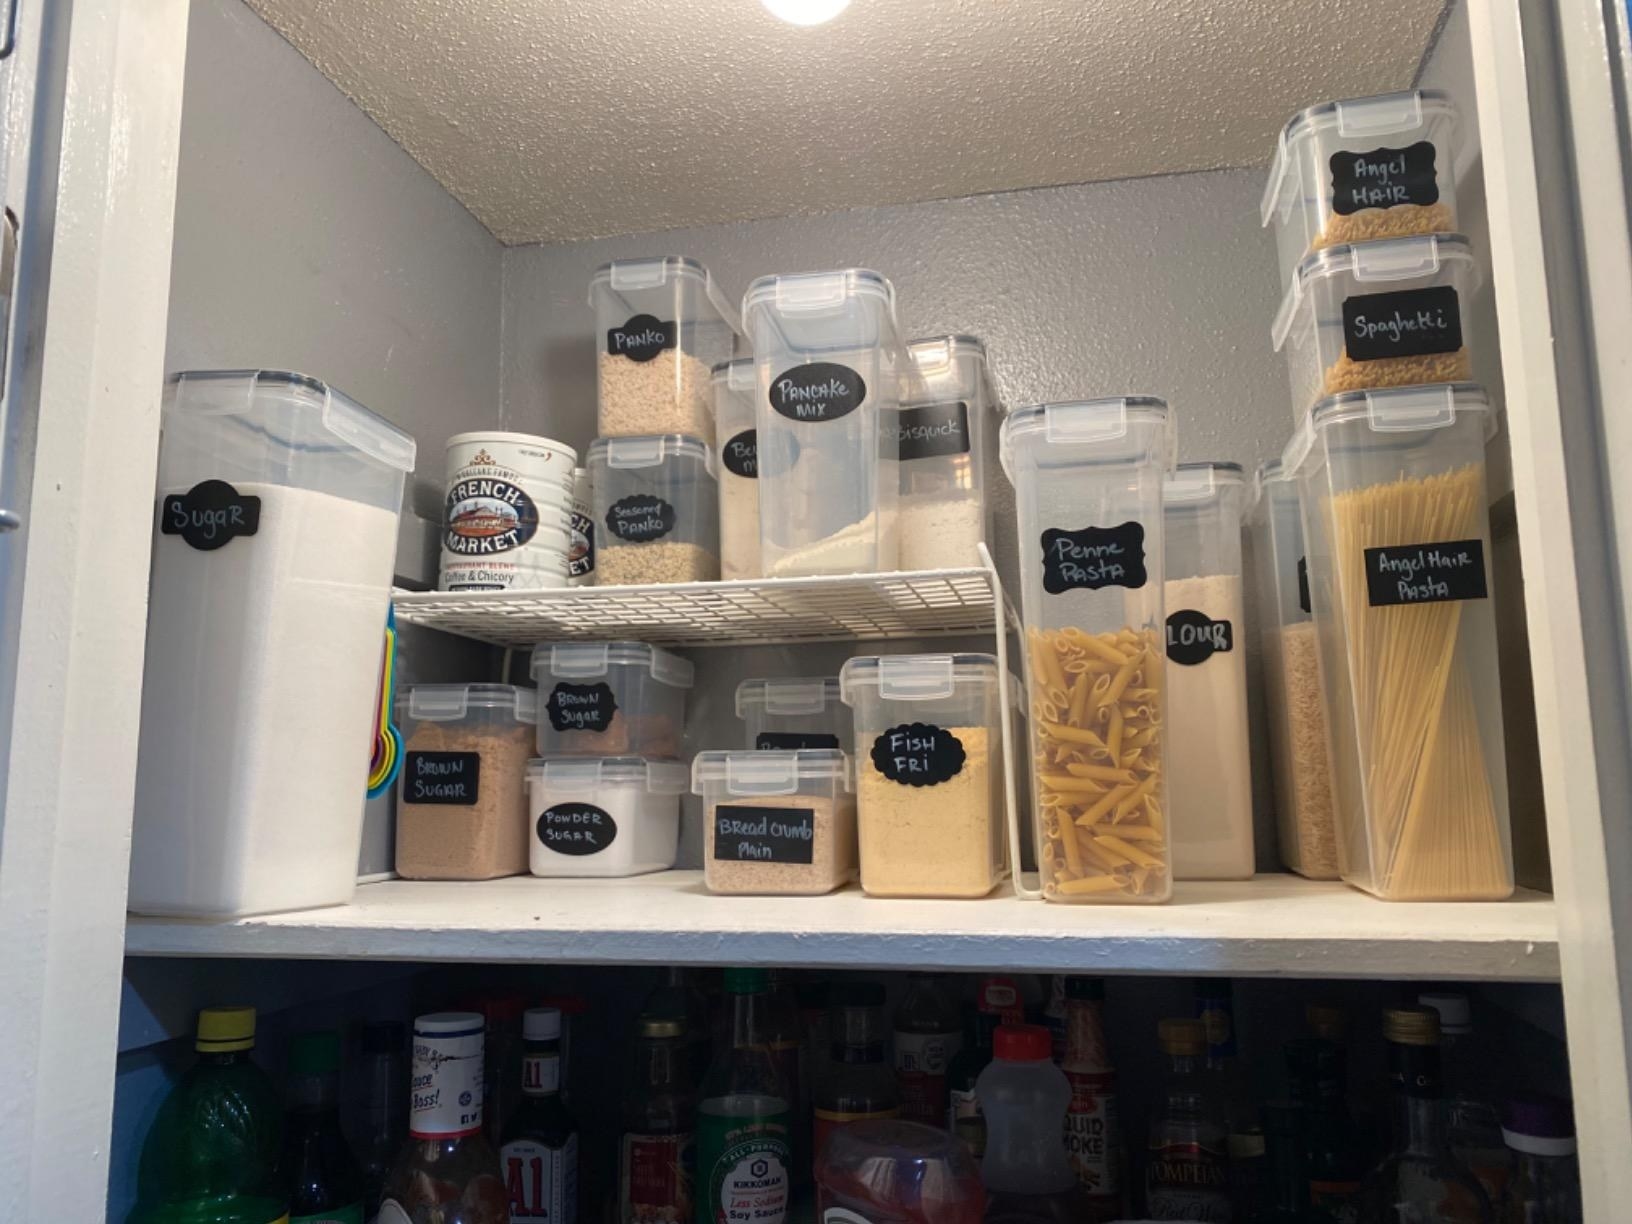 The food storage containers of various sizes, with labels, inside a pantry